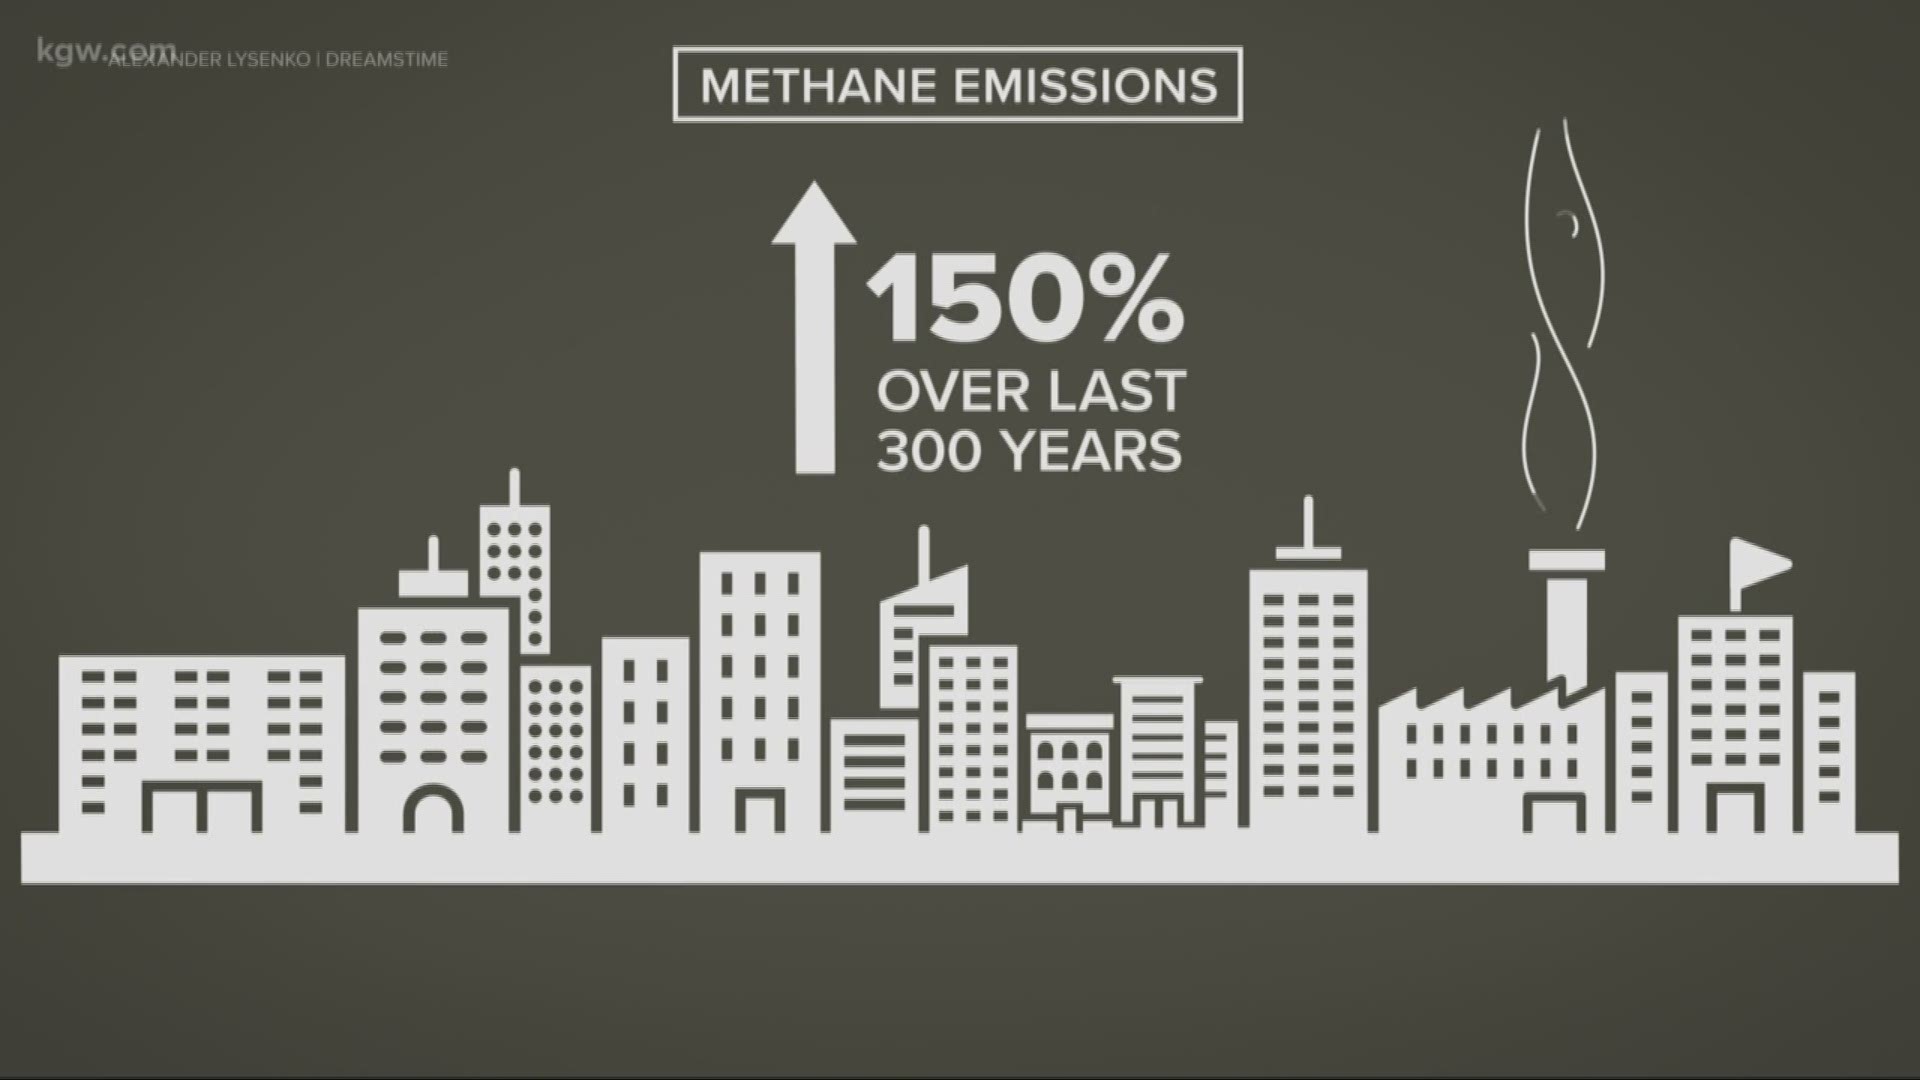 Scientists say they now have proof that the fossil fuel industry is releasing a lot more methane into the atmosphere than previously thought.